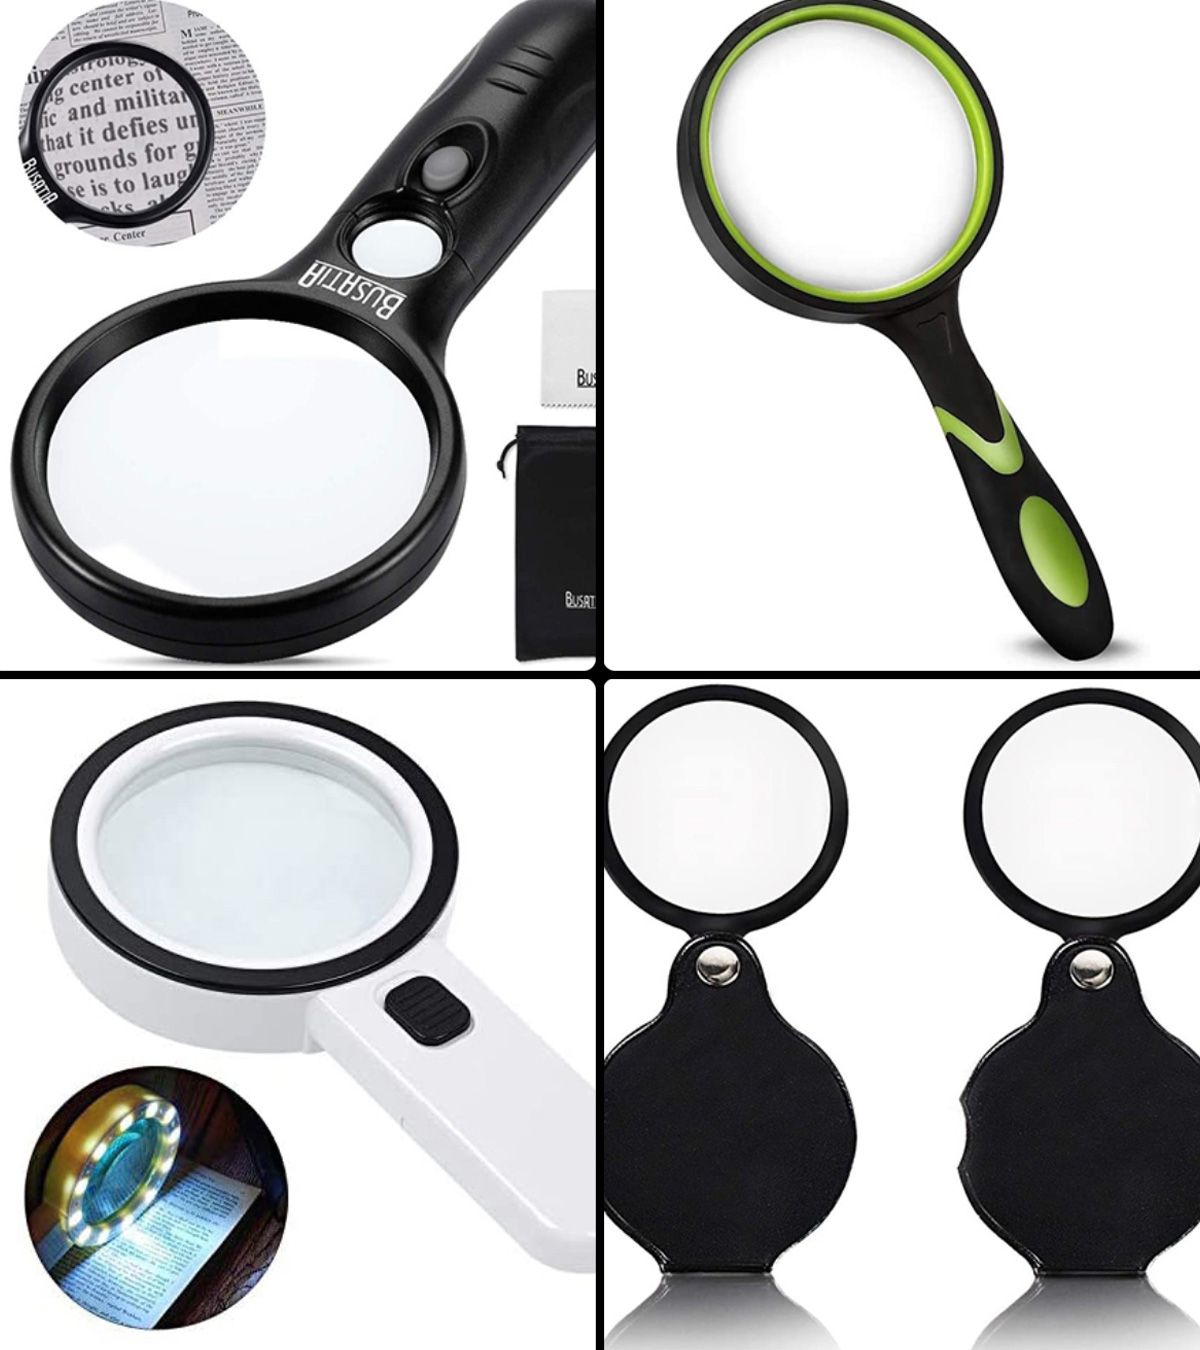 Lighted 4 Inch Hands Free Magnifier - Needlework Projects, Tools